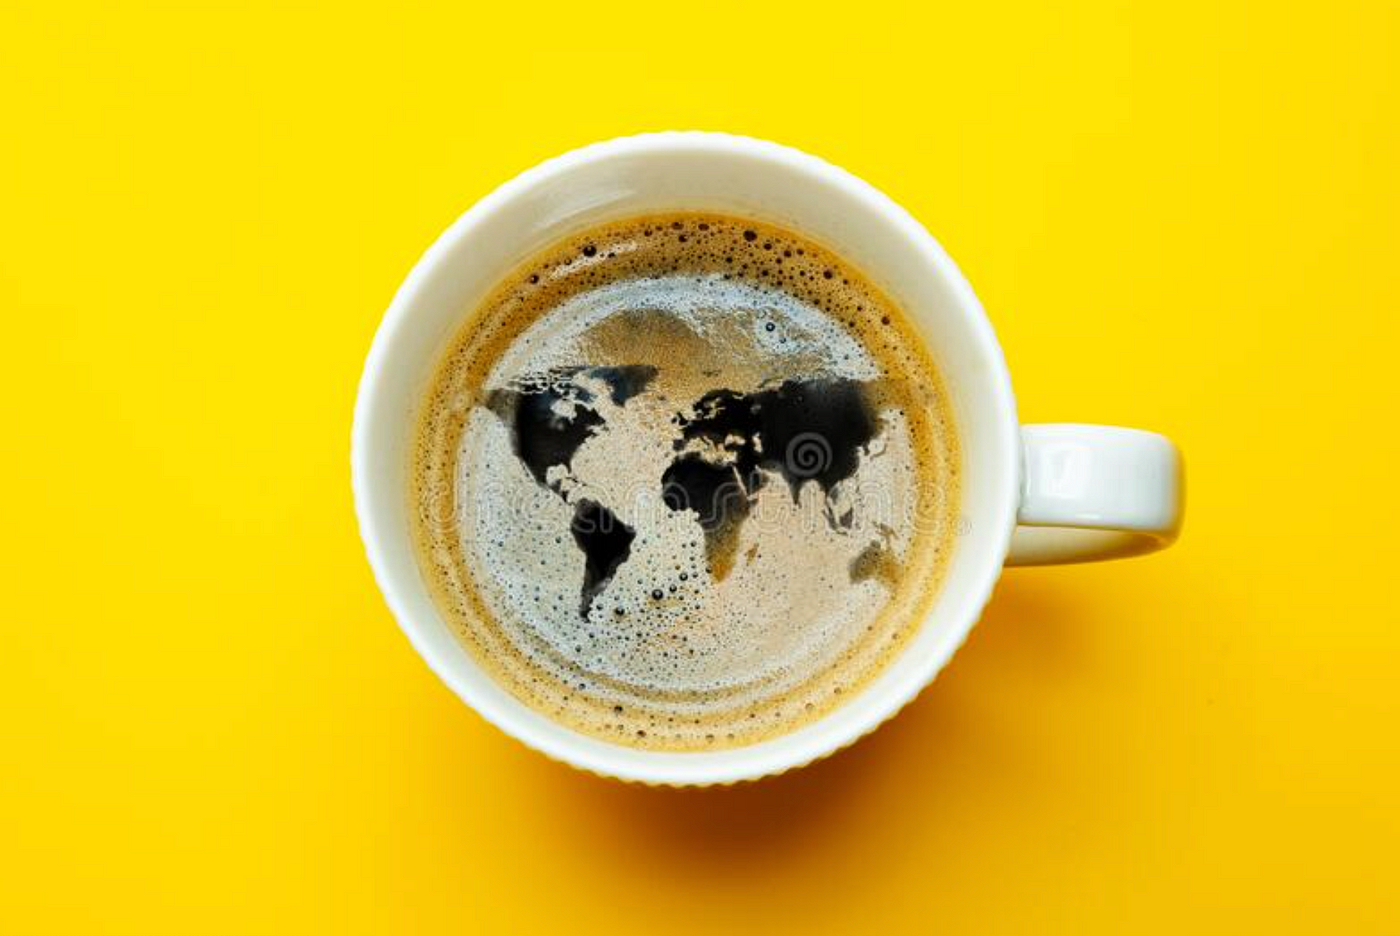 Insight: If your coffee's going downhill, blame climate change